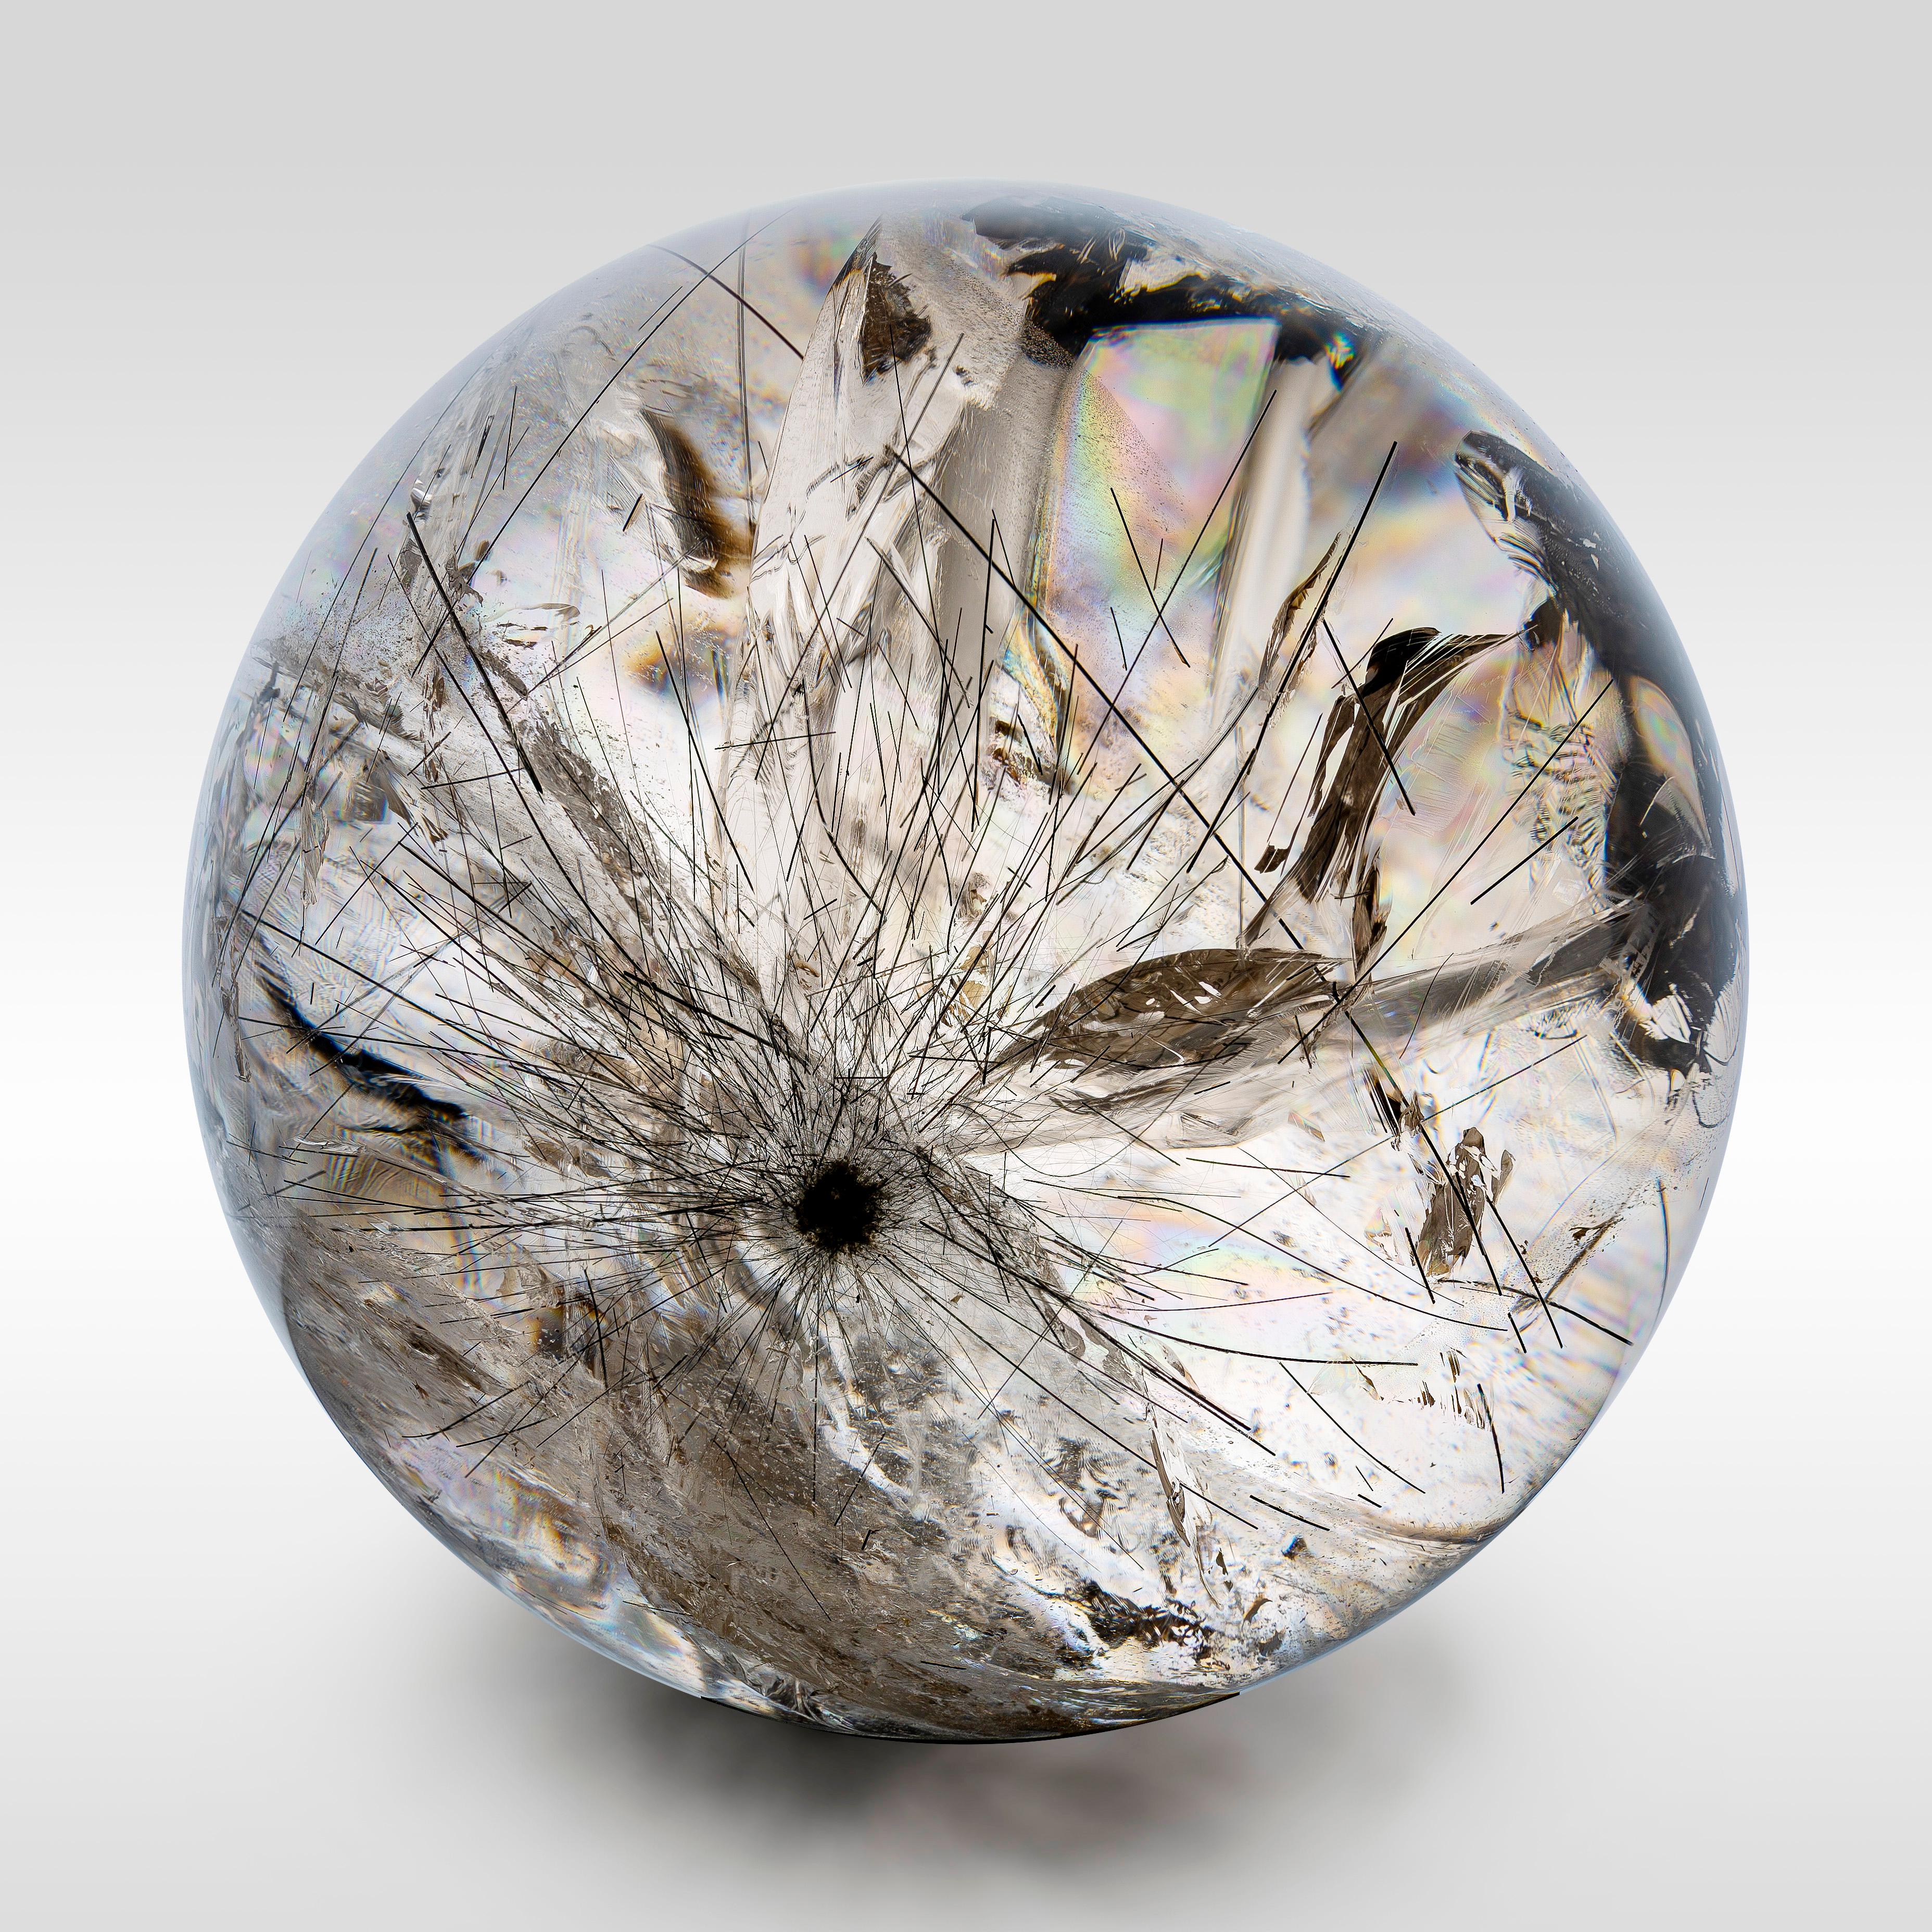 Quartz spheres are cut and polished pieces of quartz that have held cultural significance since (at least) the 1st century when they were first recorded by Pliny the Elder. They were not just attractive objet d’art but were used for the purpose of